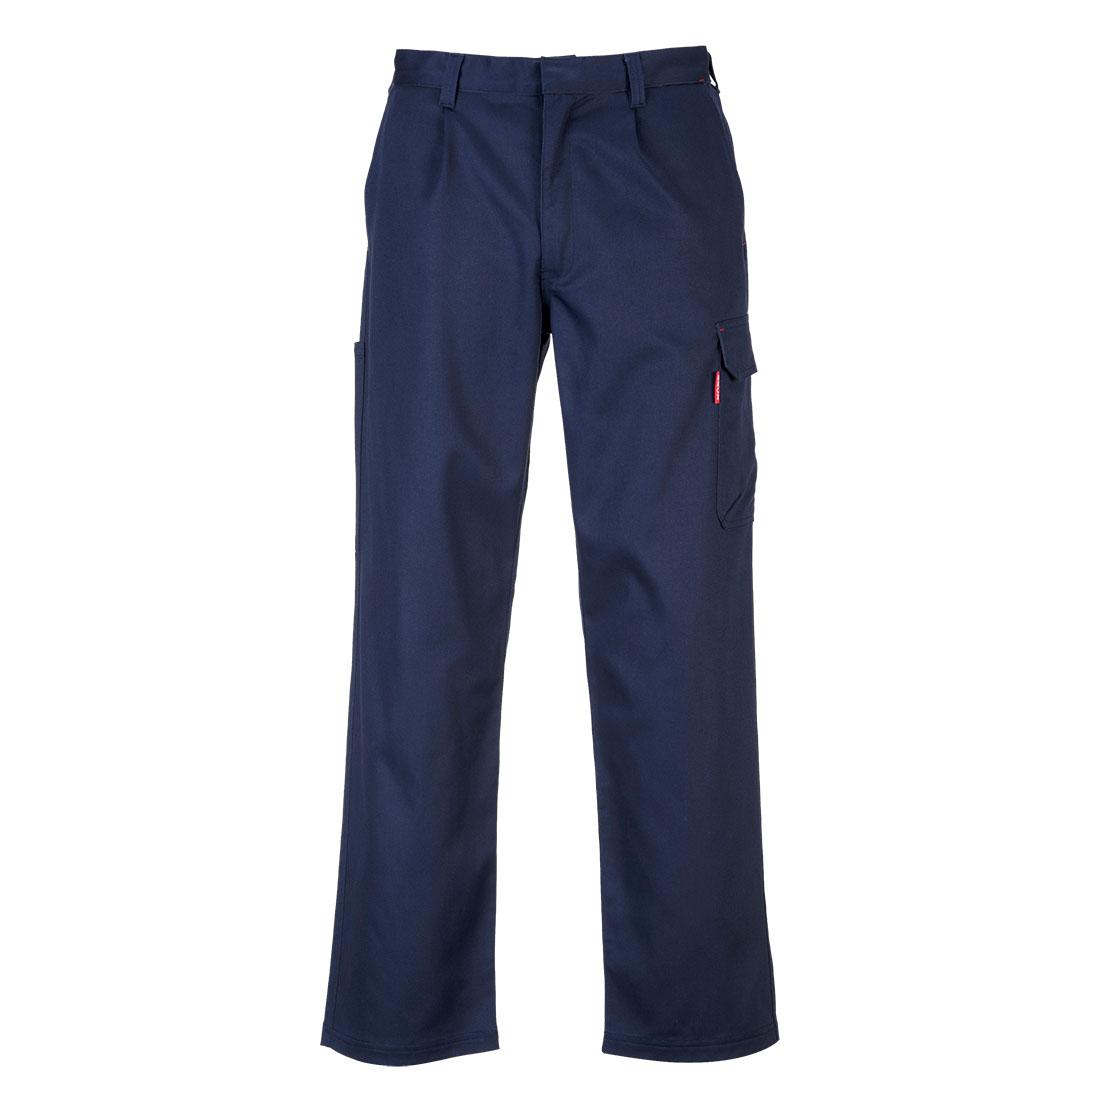 PORTWEST BIZWELD FR CARGO PANT - Safetyware Sdn Bhd